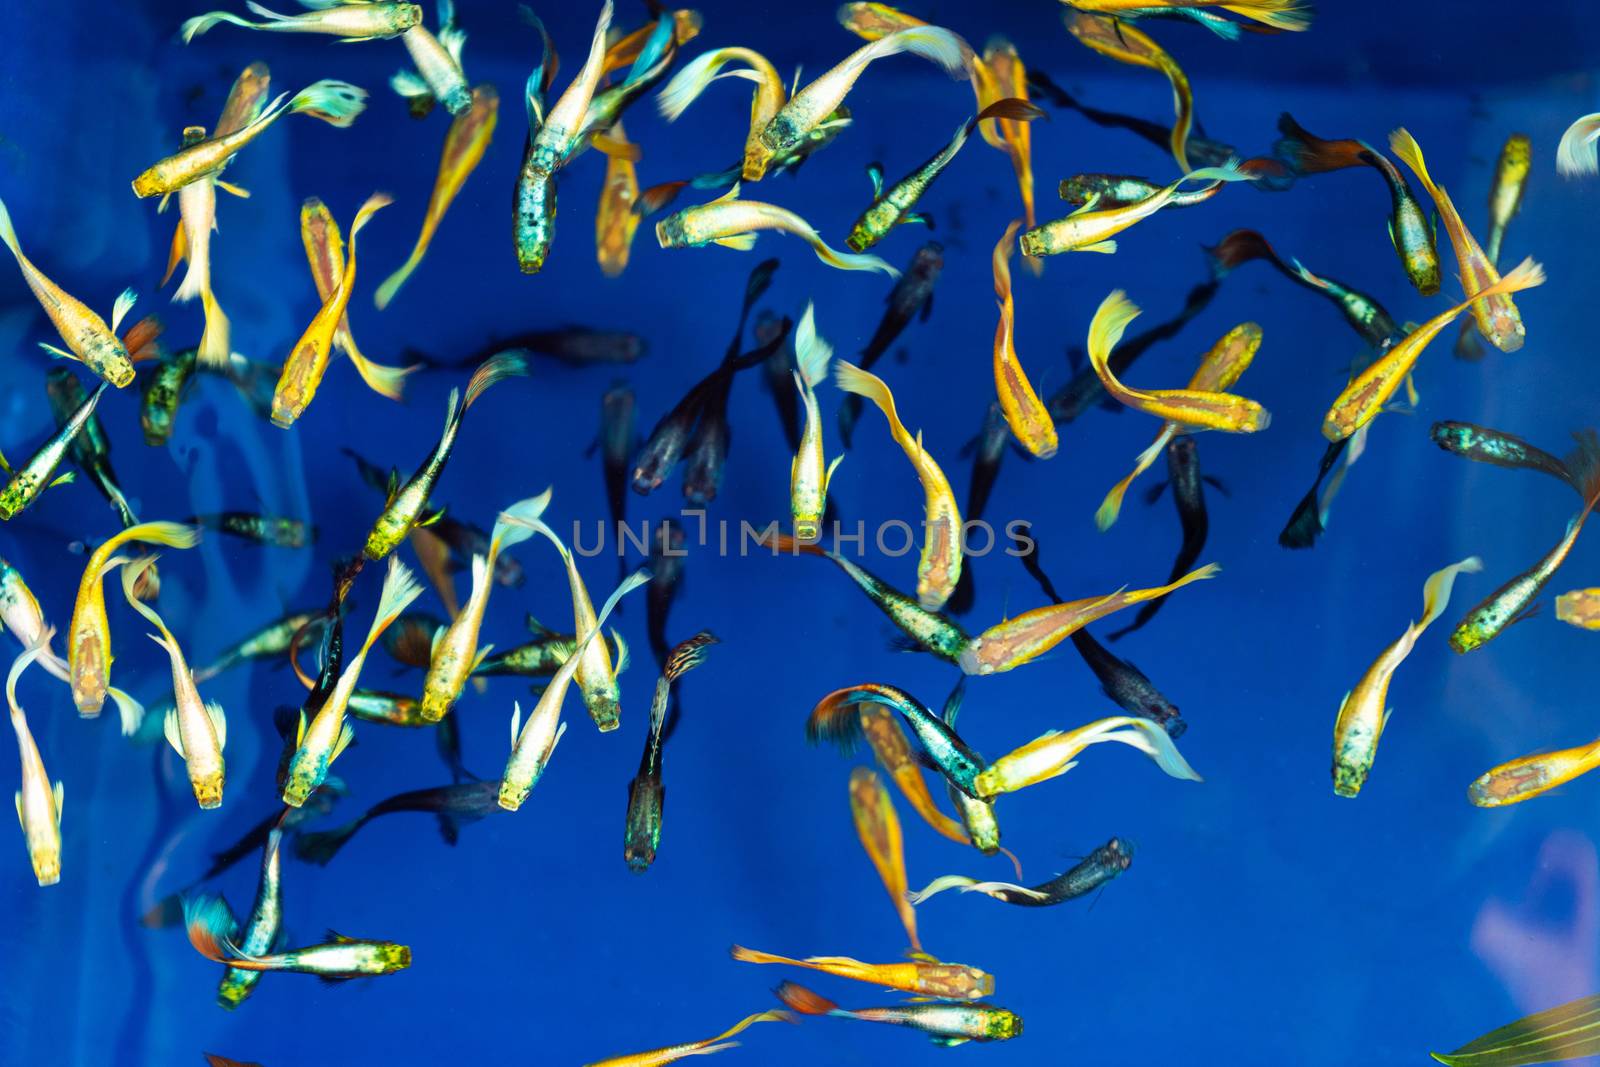 Colored tropical fish in a decorative pond. Orange decorative fish on a blue background. Flock of ornamental fish.